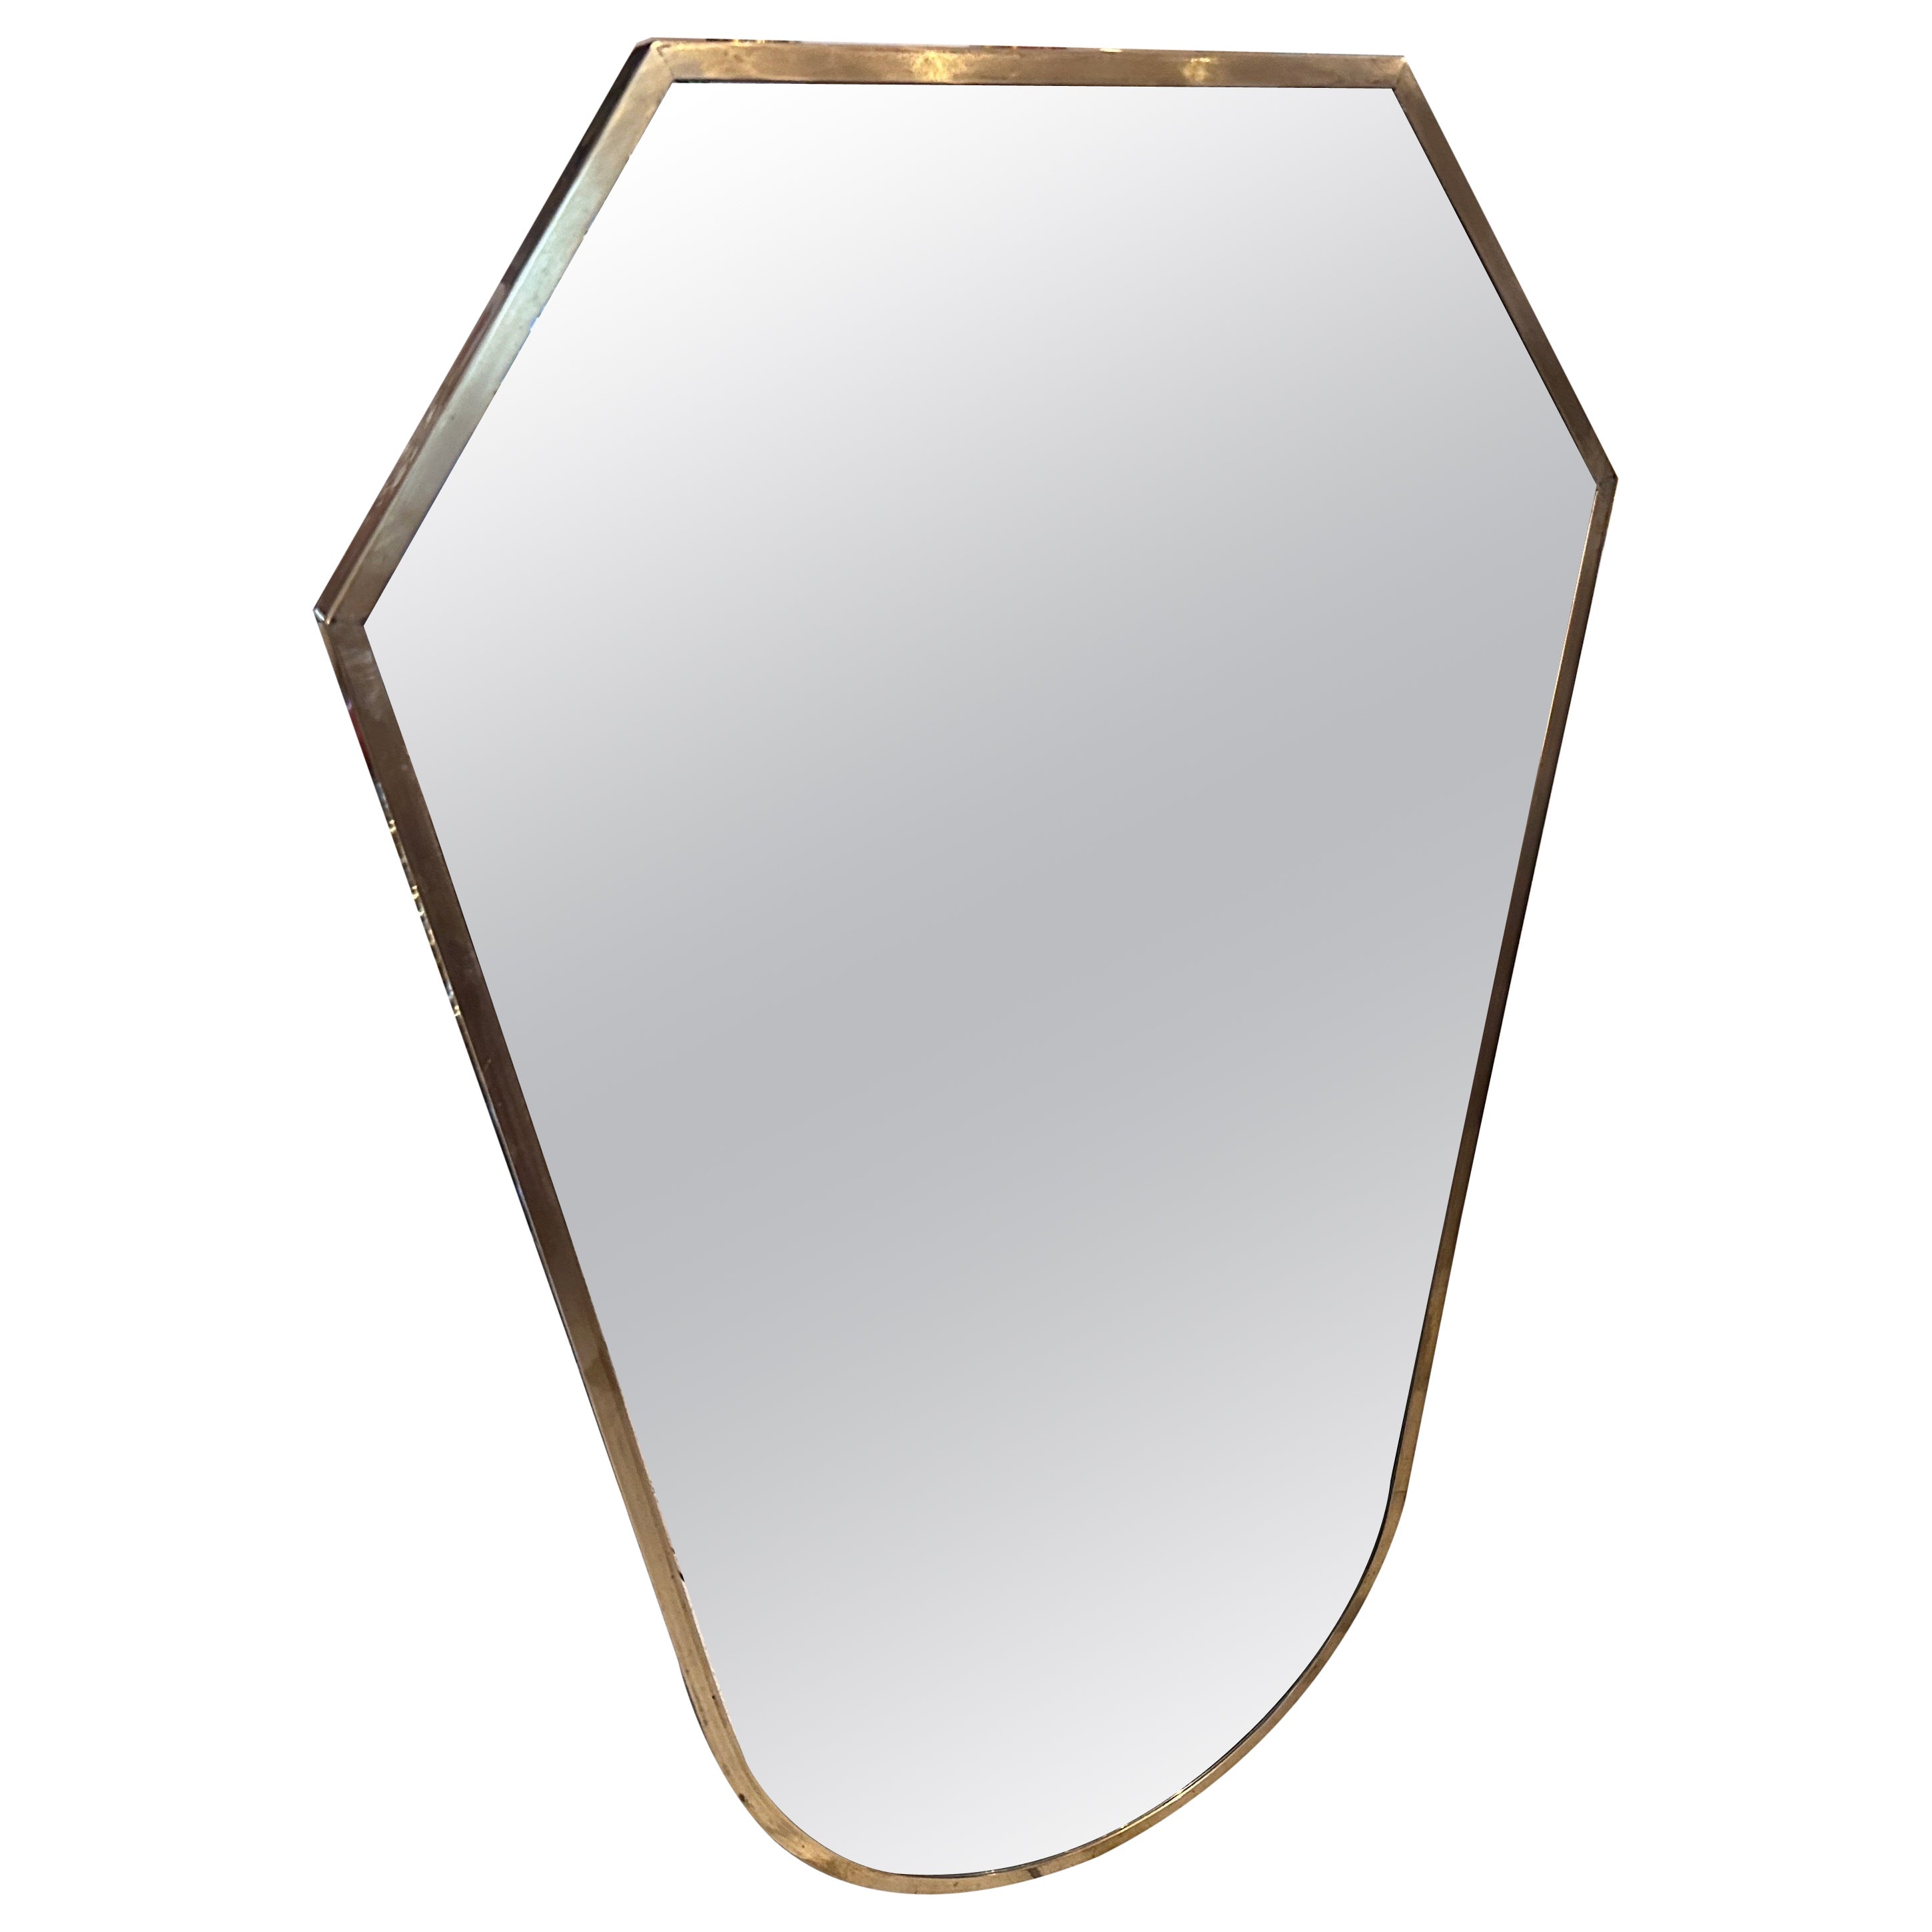 1950s Mid-Century Modern Giò Ponti Style Solid Brass Italian Shield Wall Mirror For Sale